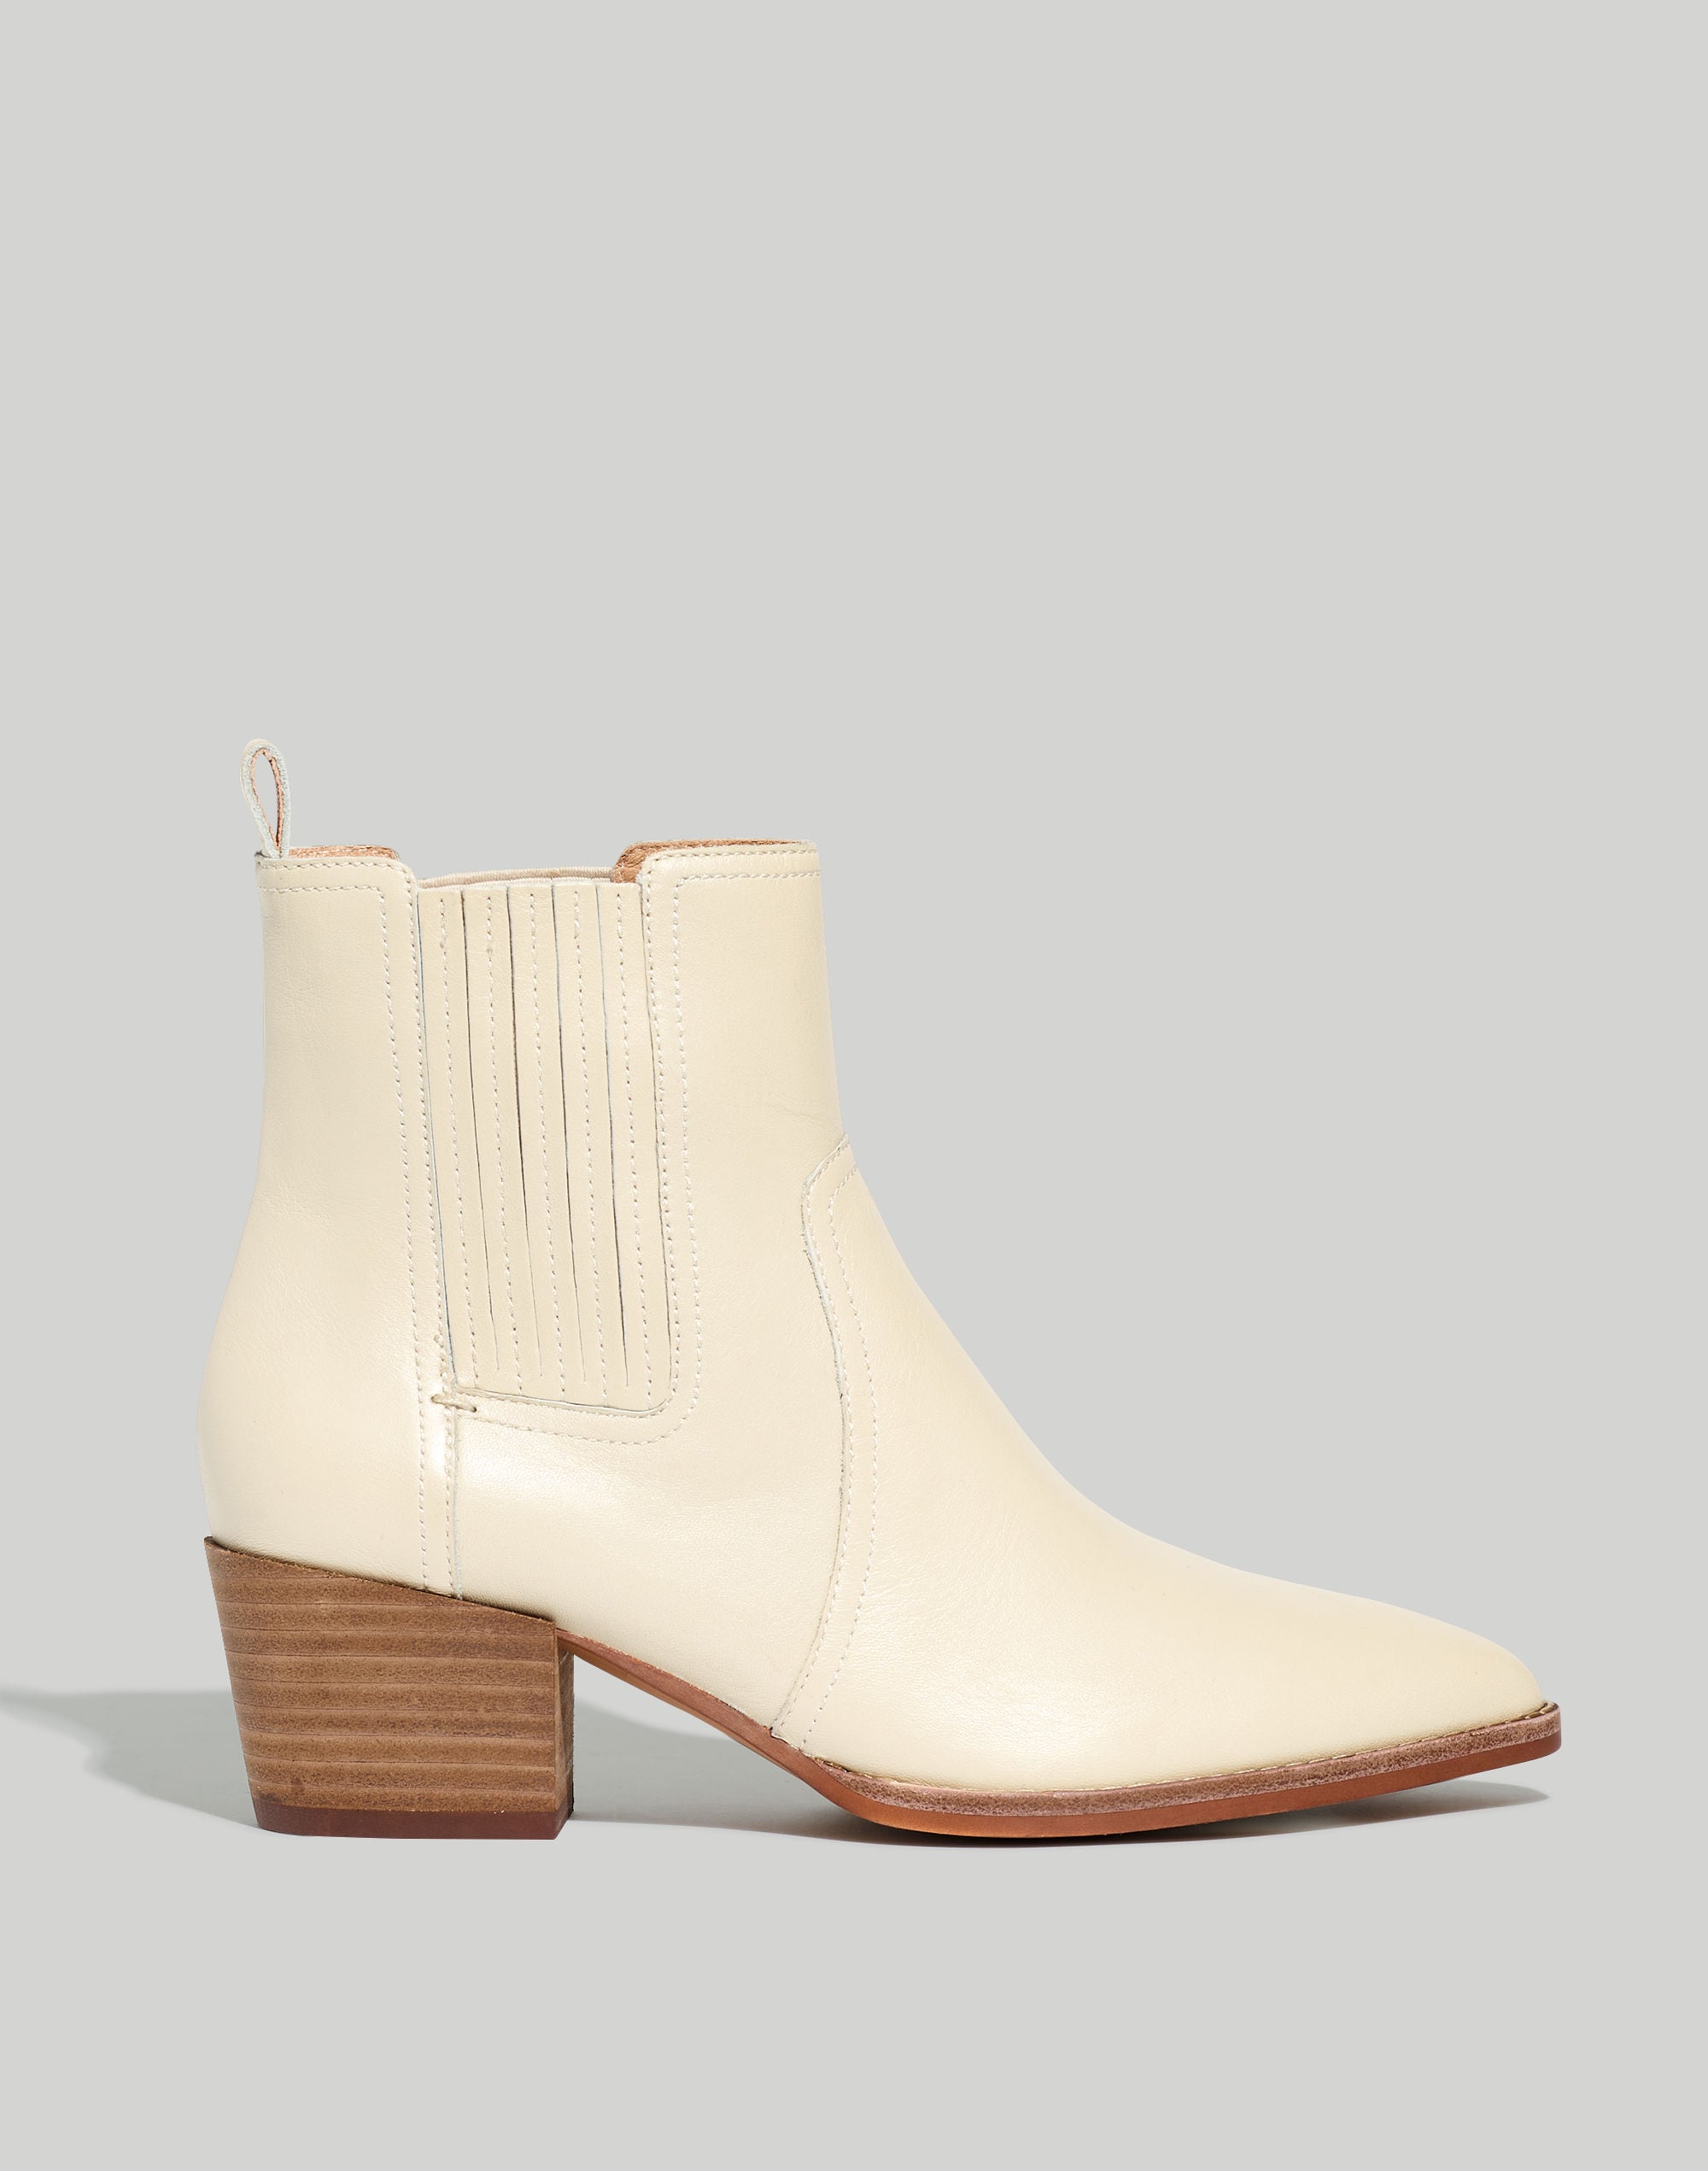 The Western Ankle Boot in Leather